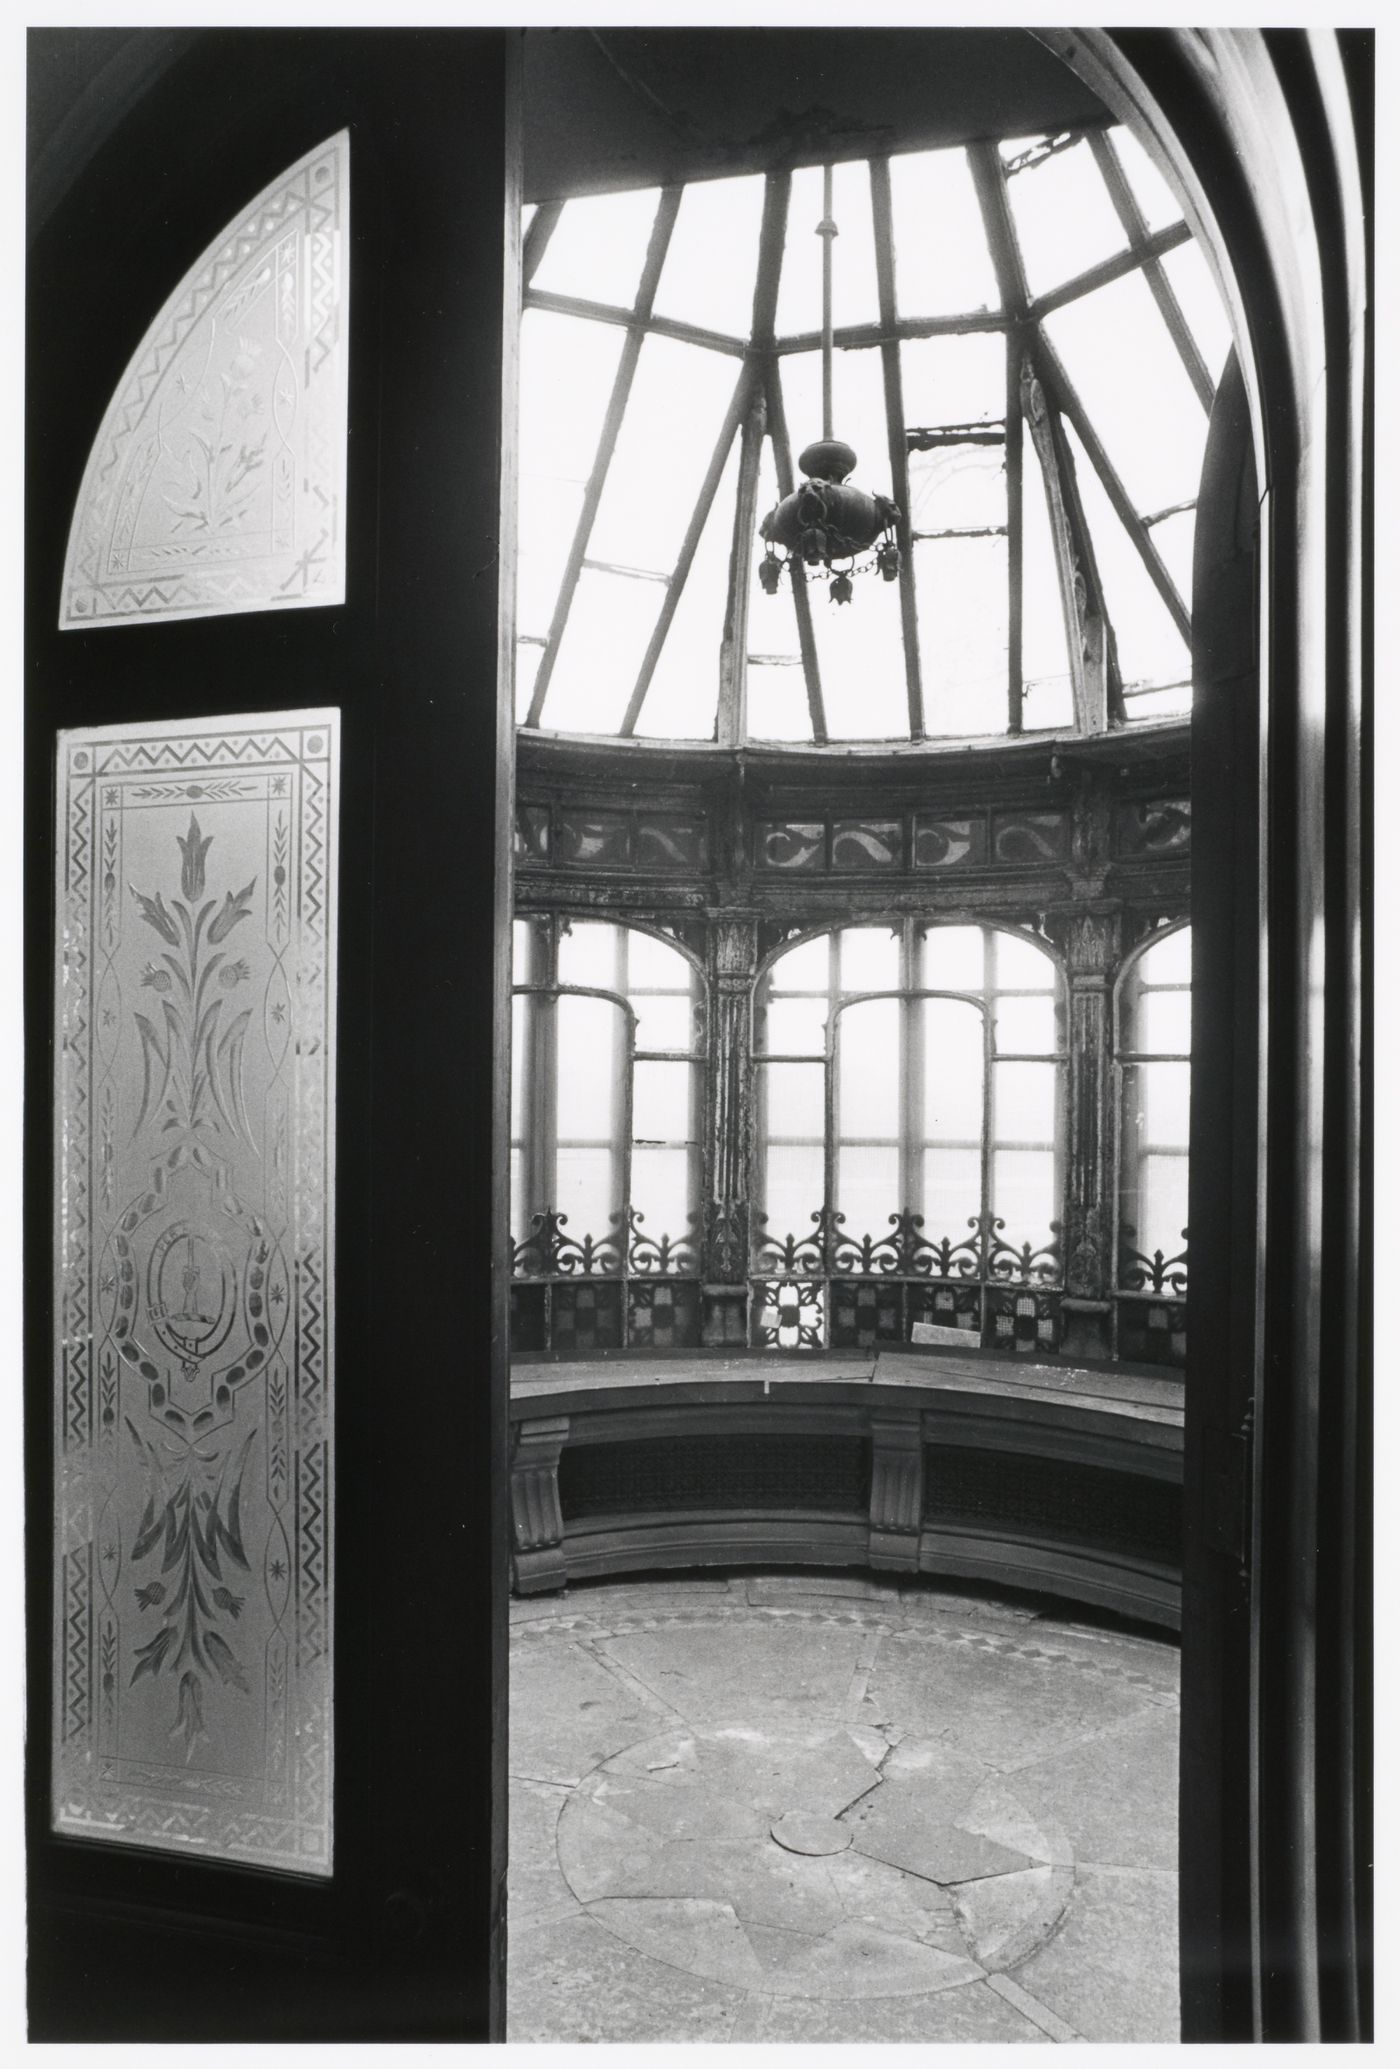 Interior view of the conservatory showing the frosted glass doors and the glazed and ironwork ceiling, Shaughnessy House, Montréal, Québec